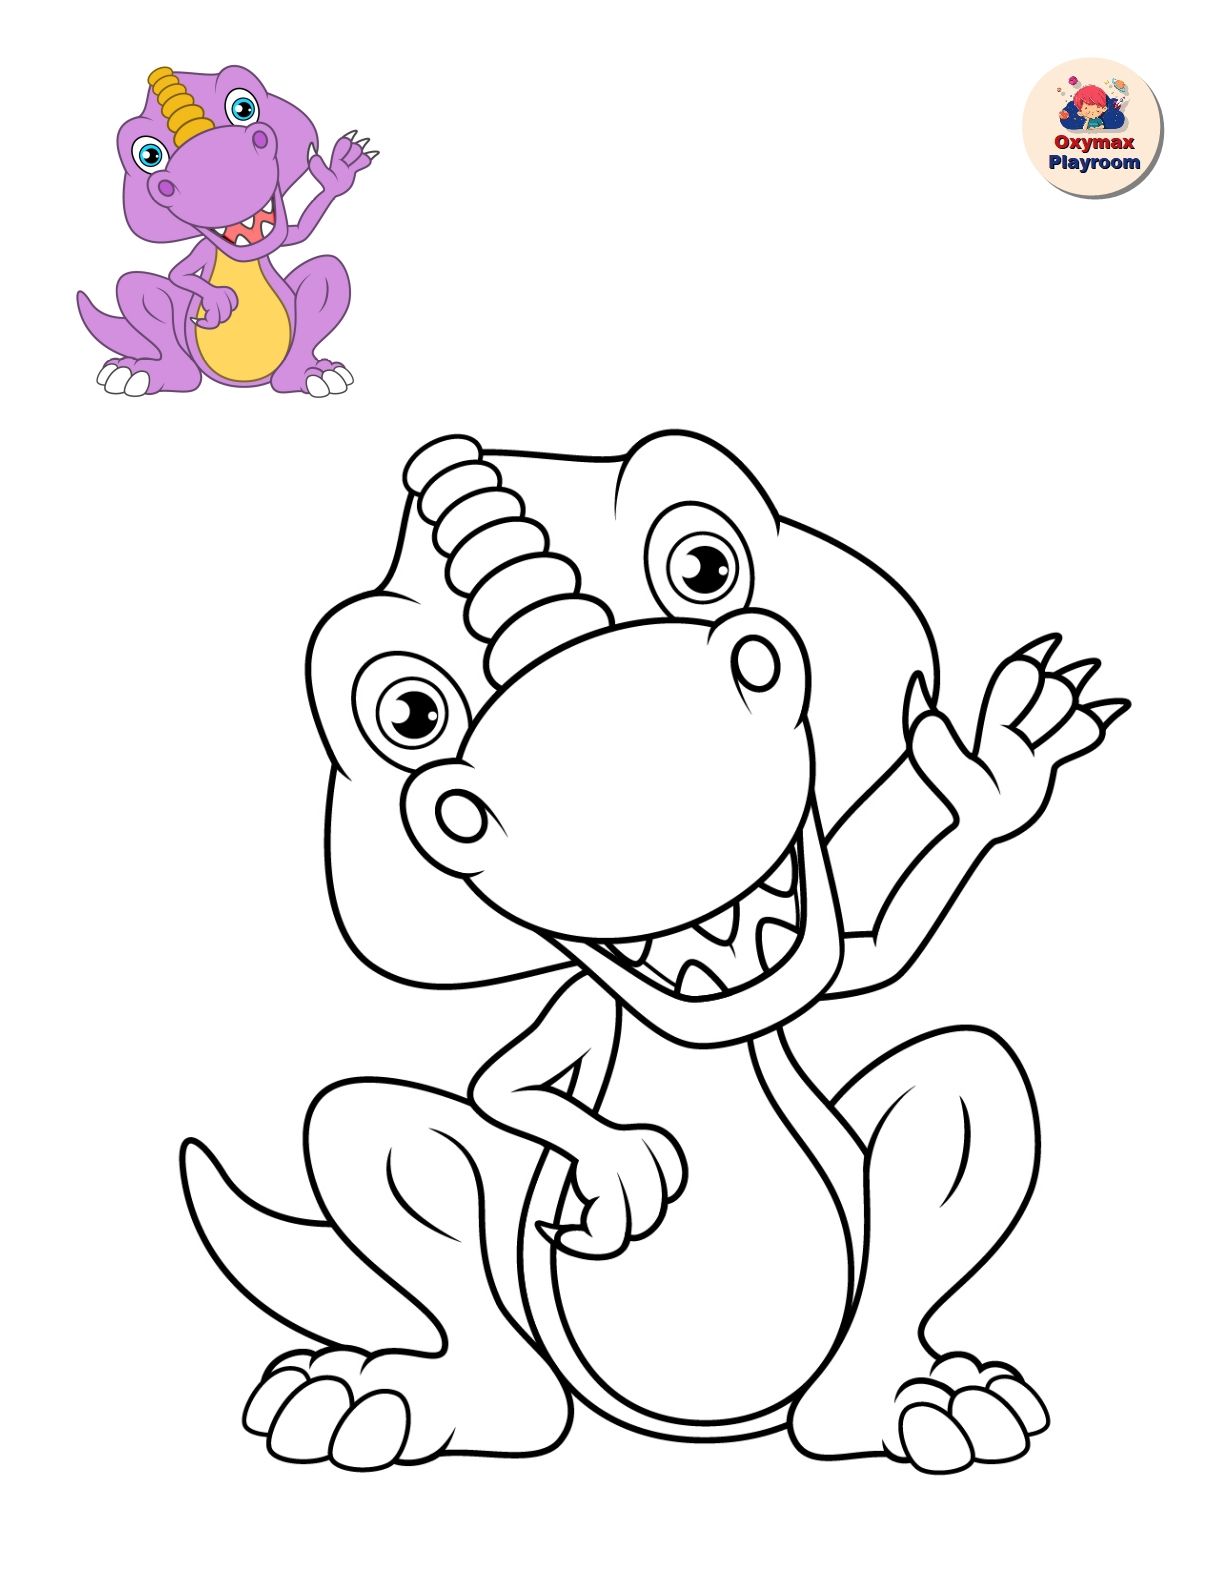 Download Coloring pages for children: "Dinosaurs"